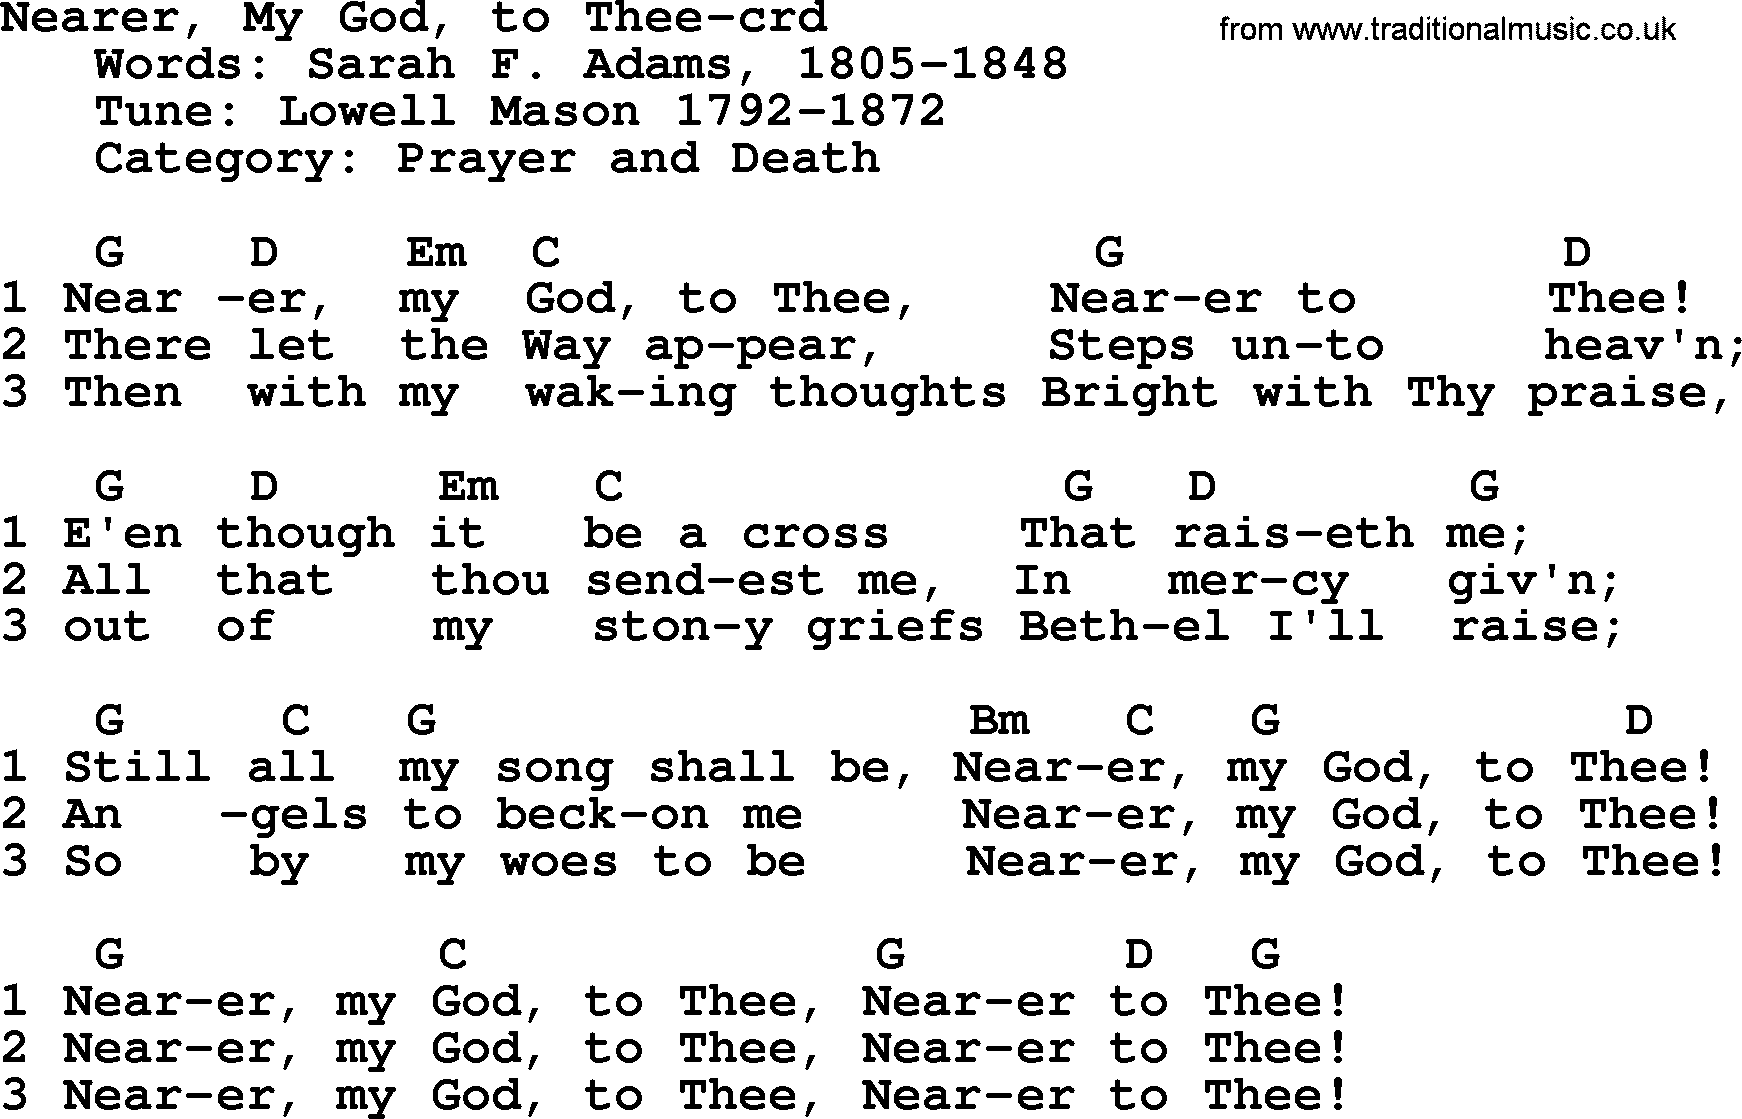 Top 500 Hymn: Nearer, My God, To Thee, lyrics and chords